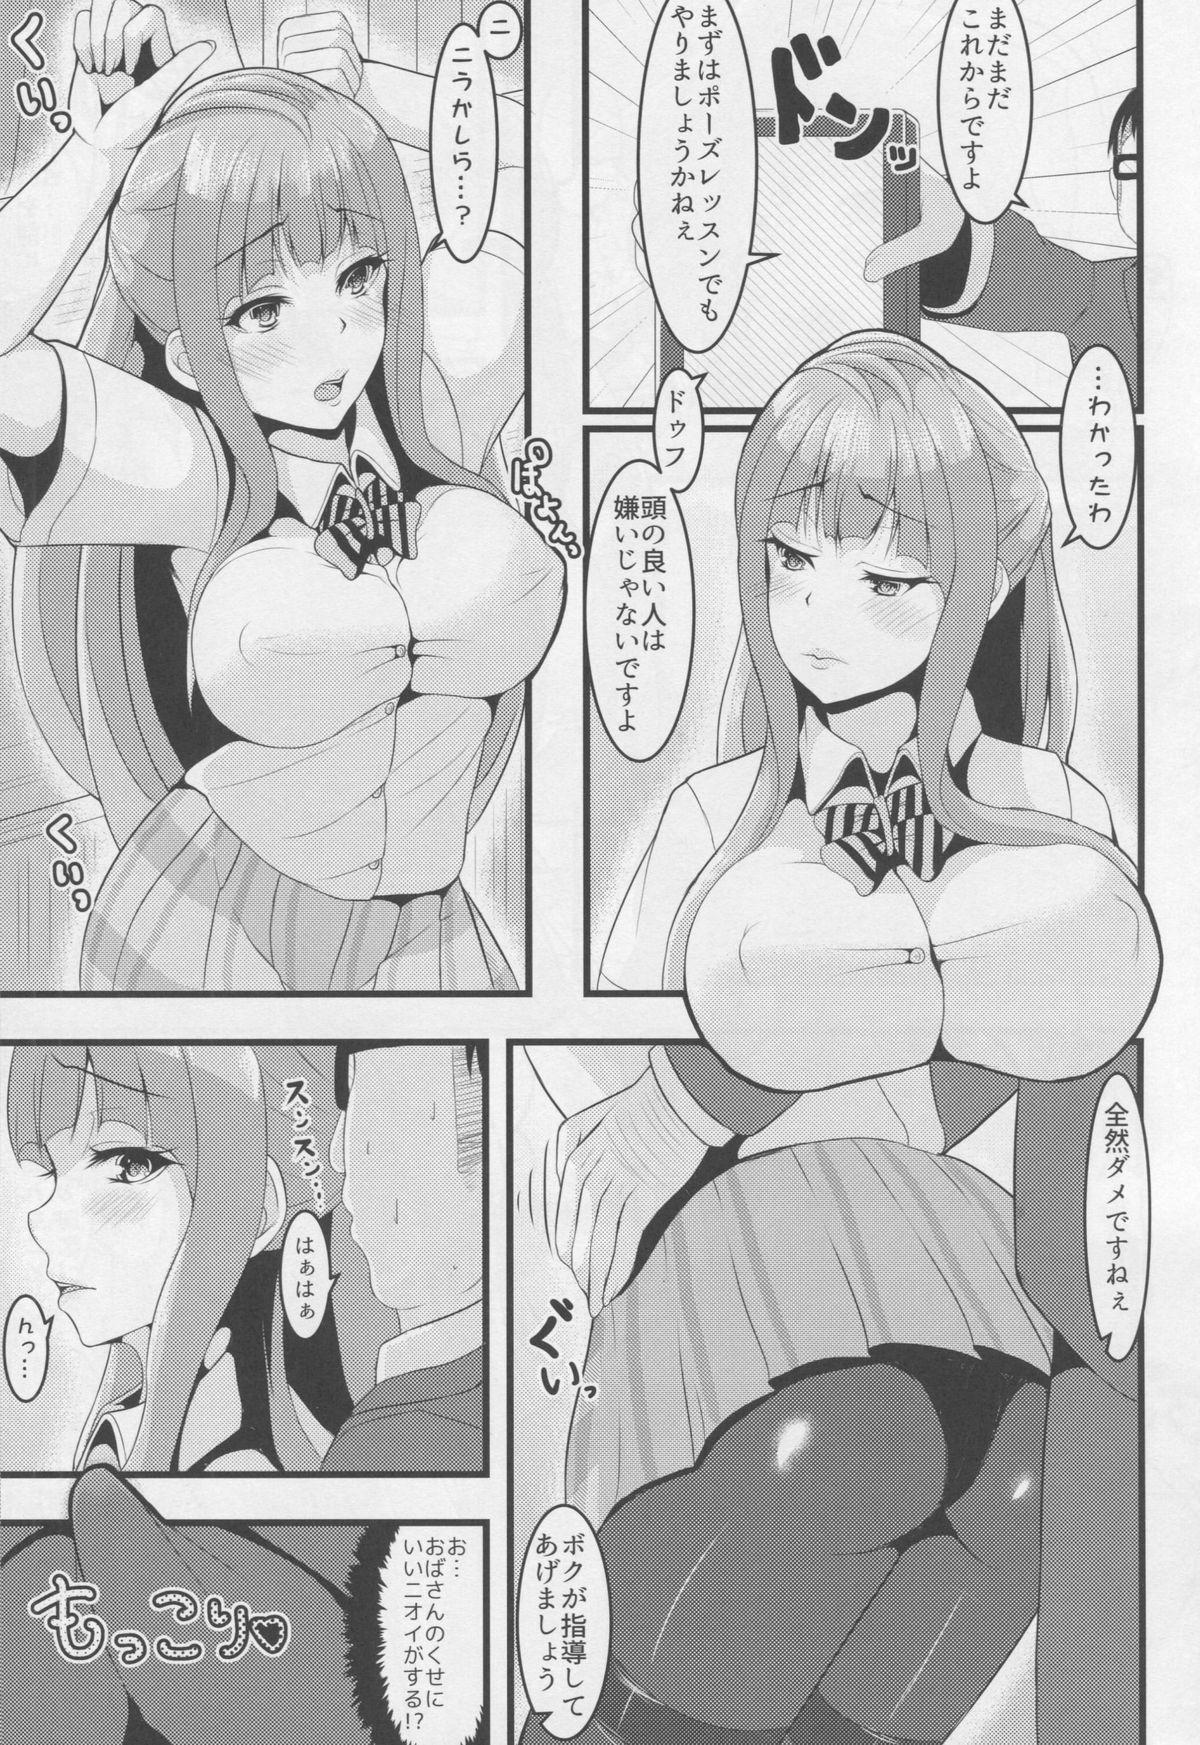 Hungarian After school Mama Raper - Love live Whore - Page 6